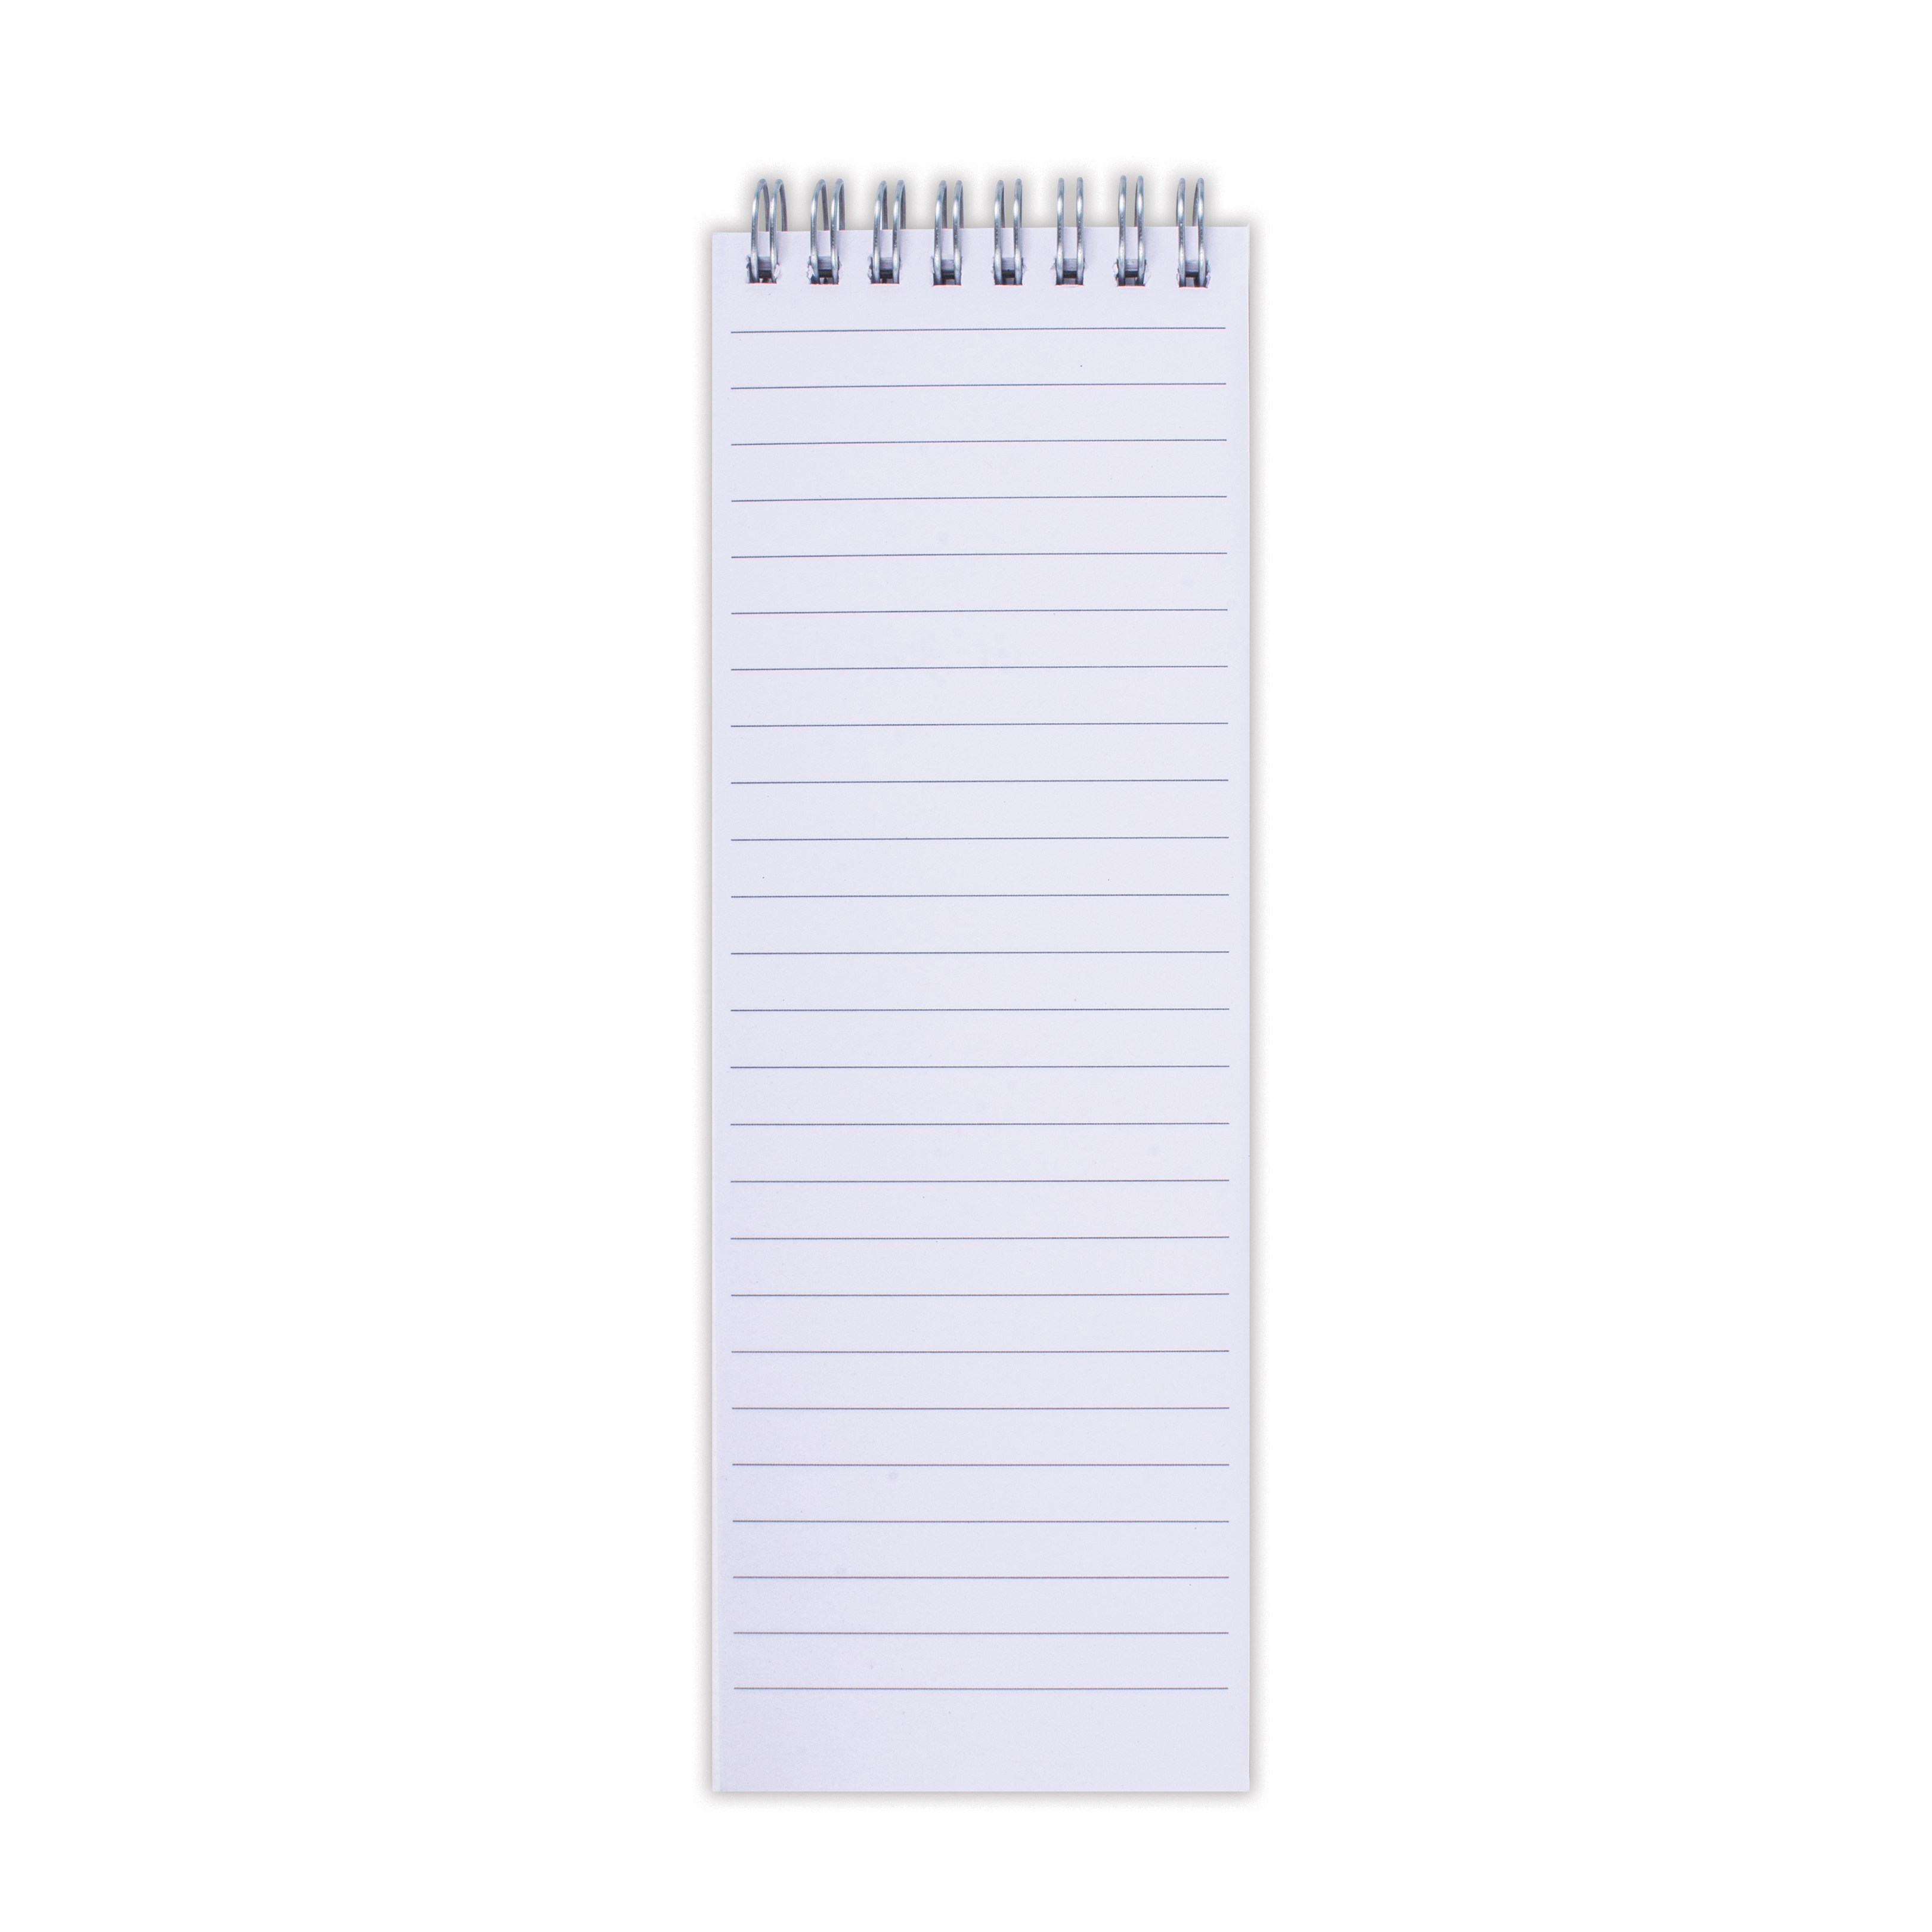 Spiral Memo Pad Capture Your Thoughts Approx L8.75 x W3inch 90gsm 54Sheets 1 Book